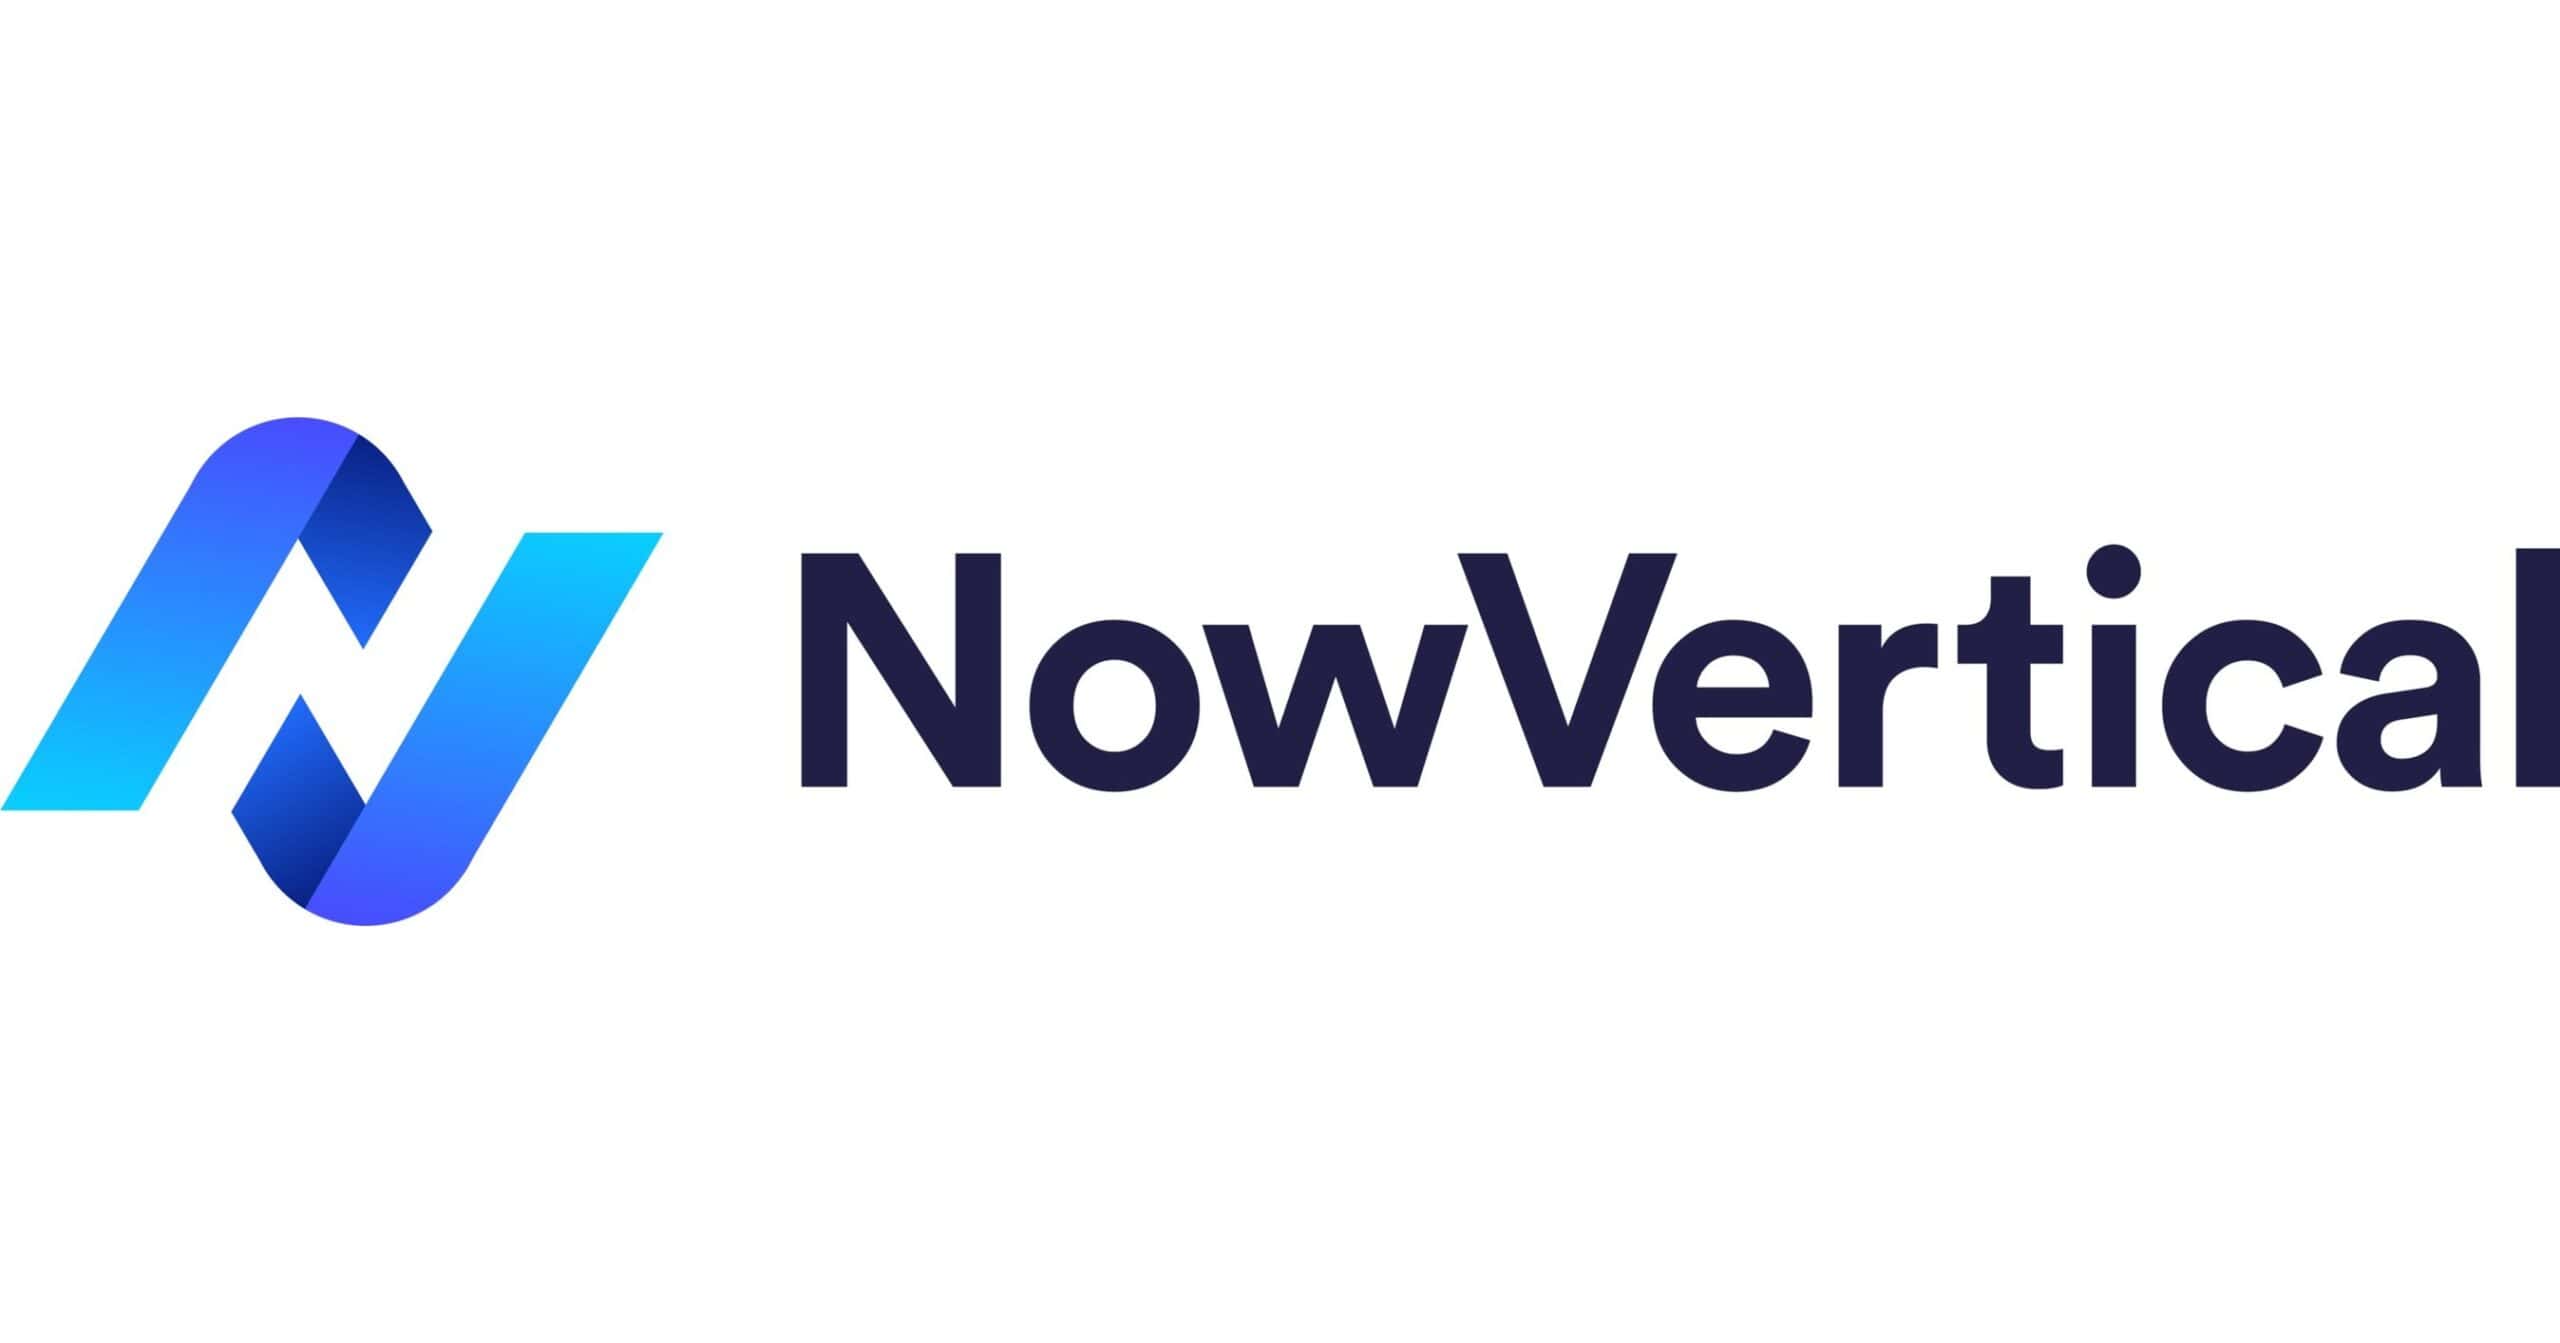 NowVertical Group Inc. unveiled its strategic expansion plans in Peru and Mexico, along with a new agreement with McDonald's LATAM.